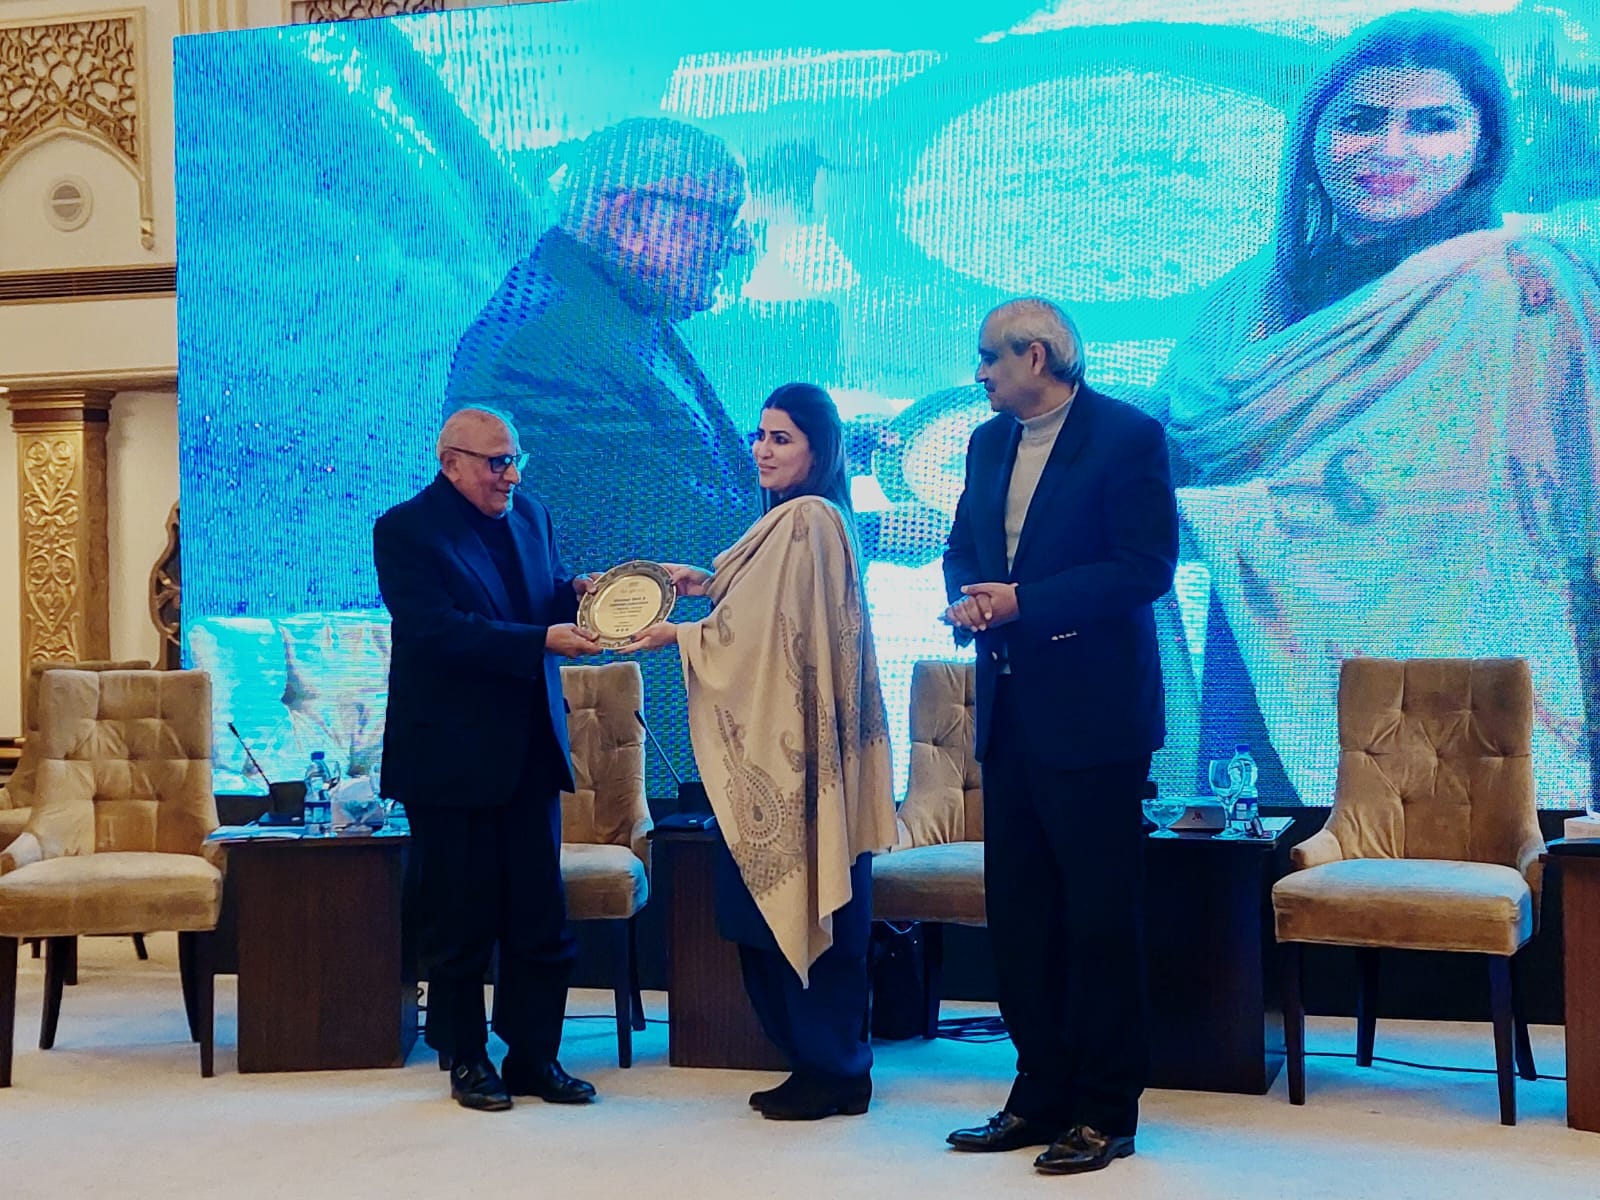 Mr. Shoaib Sultan Khan, Chairman NSRS presenting souvenir to Ms. Shazia Marri, Federal Minister and Chairperson BISP.